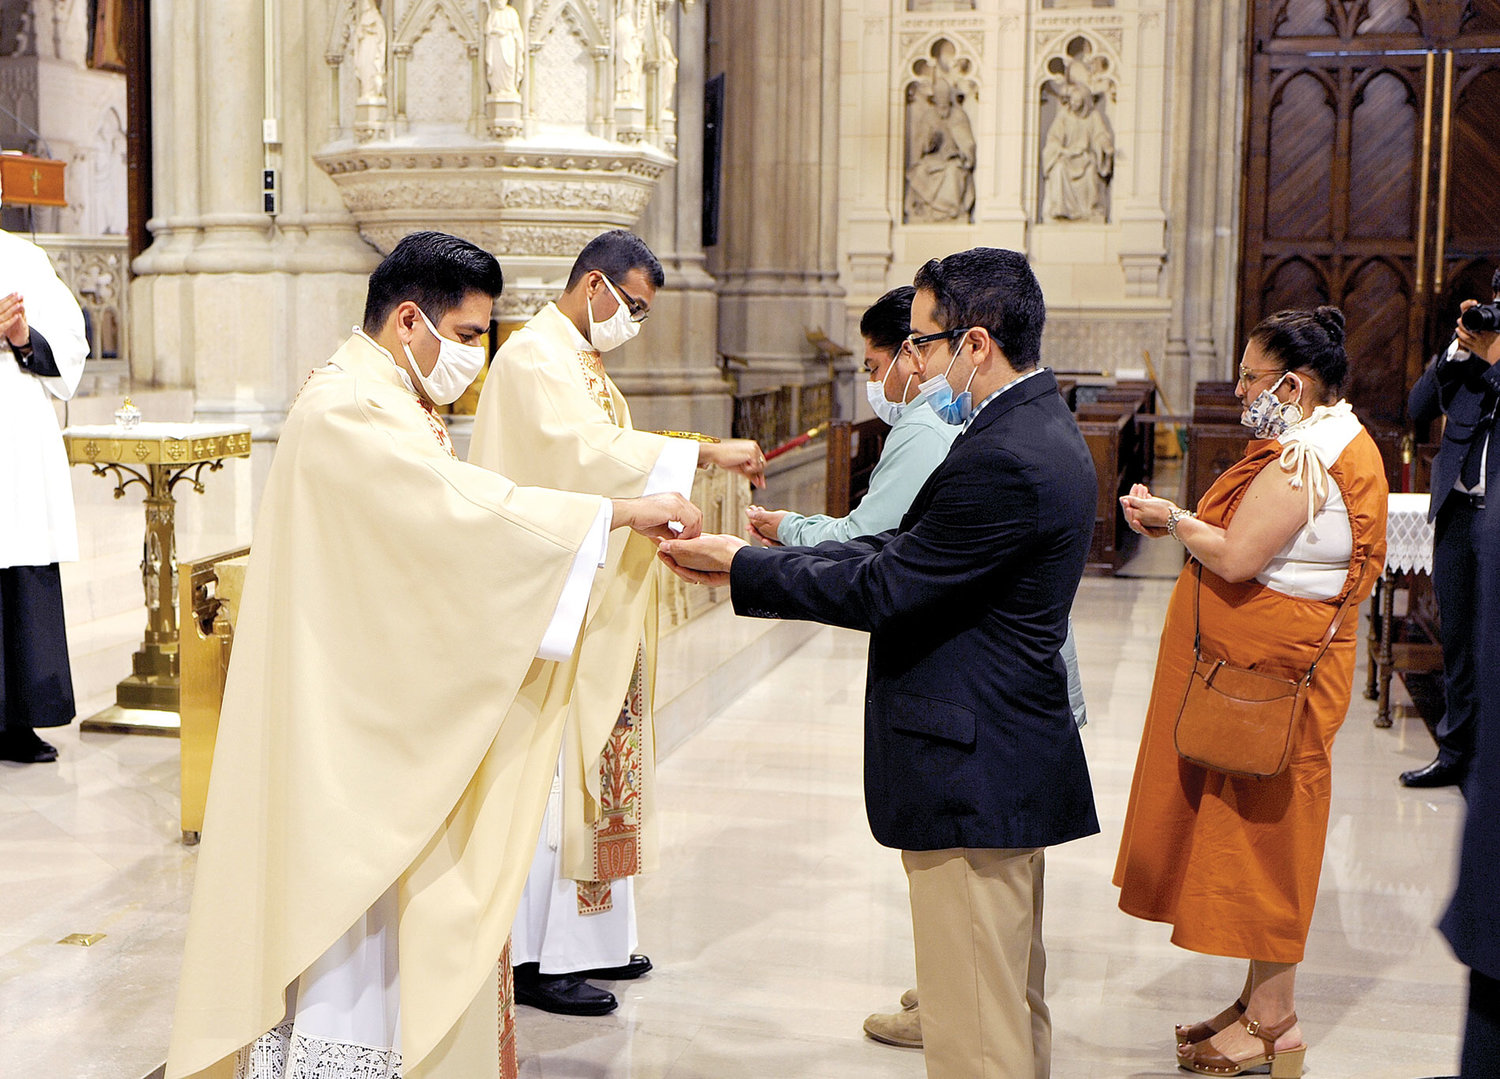 The two new priests distribute Holy Communion.